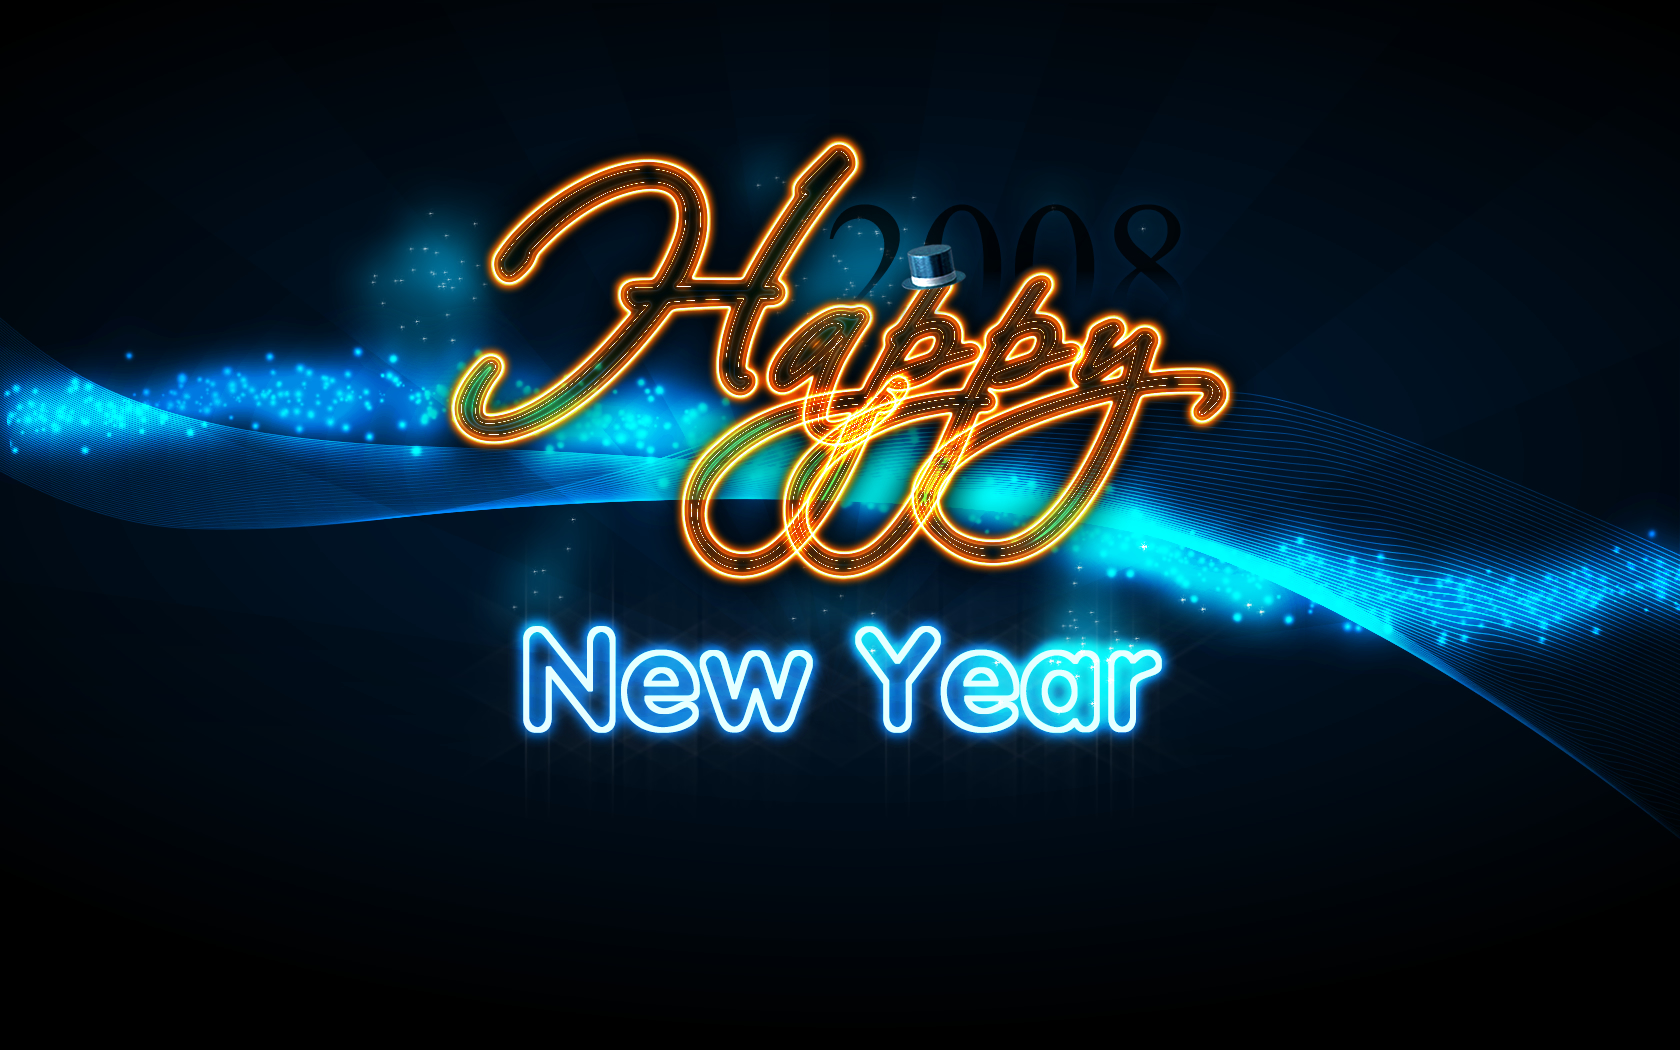 Happy New Year 2012 Wishes - HD Wallpaper 